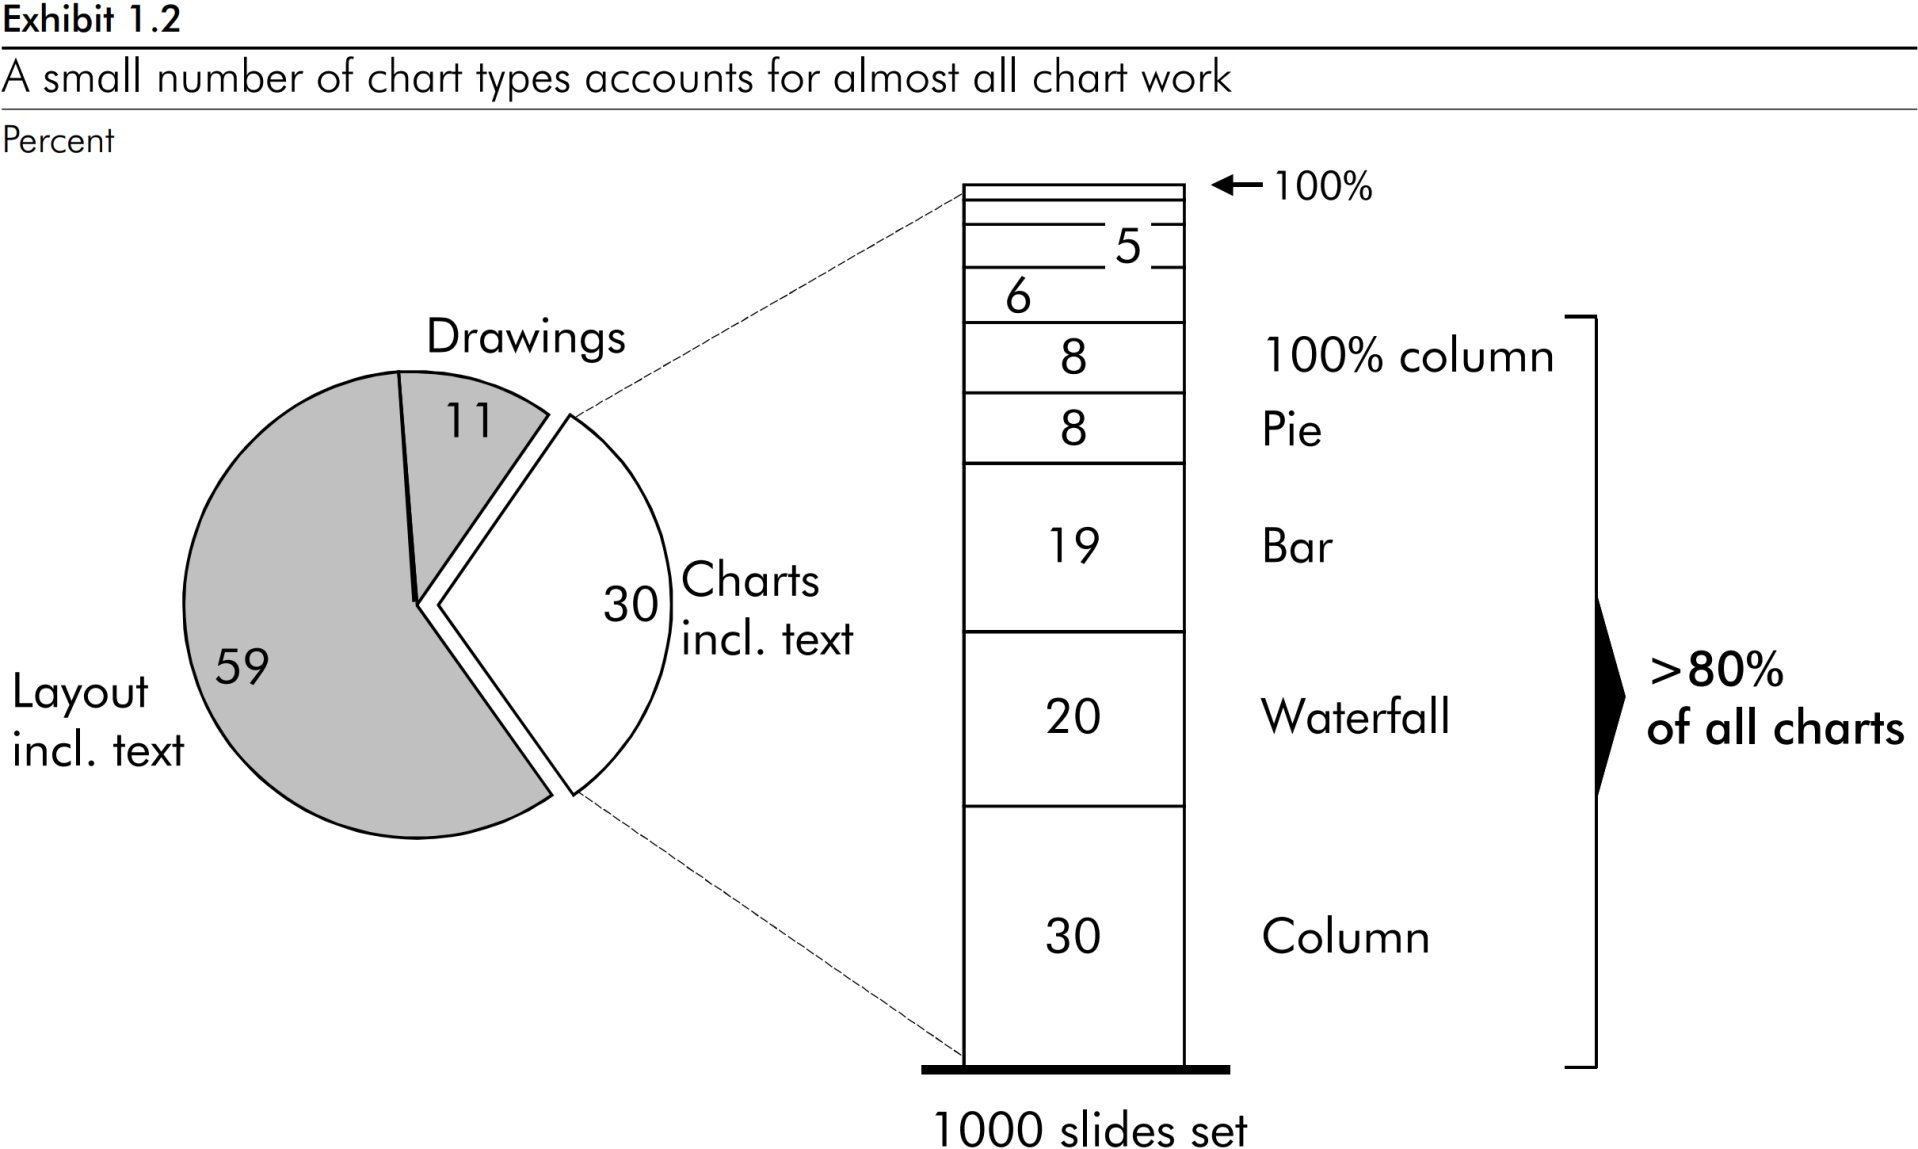 Pie chart showing 85% of all chart production work is done across only 5 chart types; 100% column, pie, bar, waterfall and column.